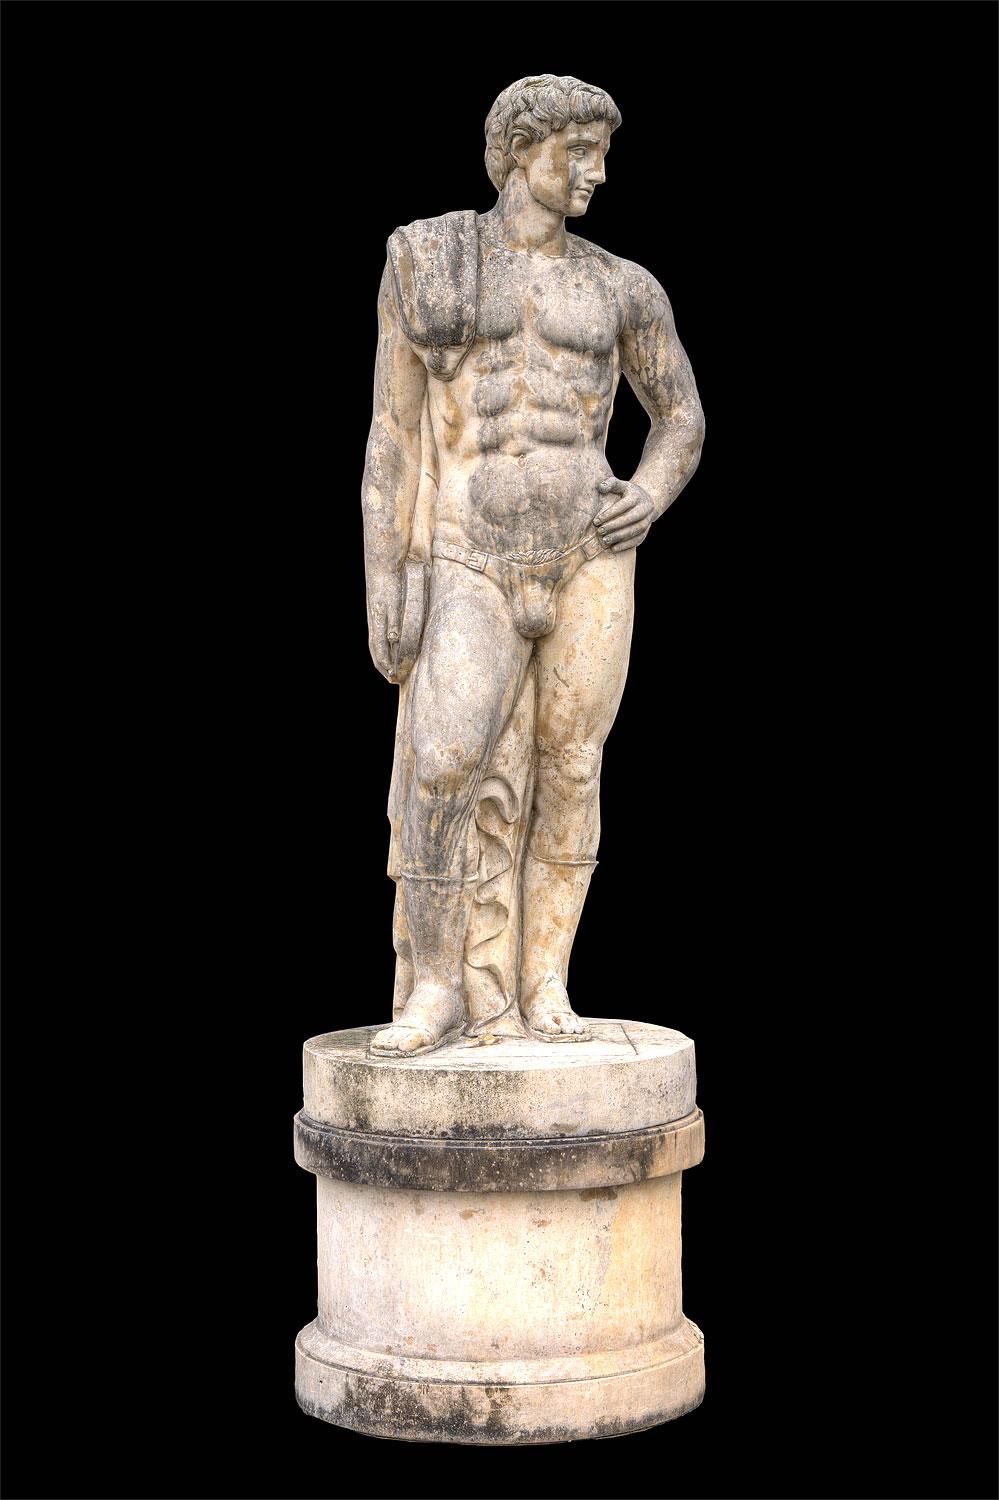  Monumental Italian Rationalist Marble Sculptures of Hercules and Discobolo For Sale 14